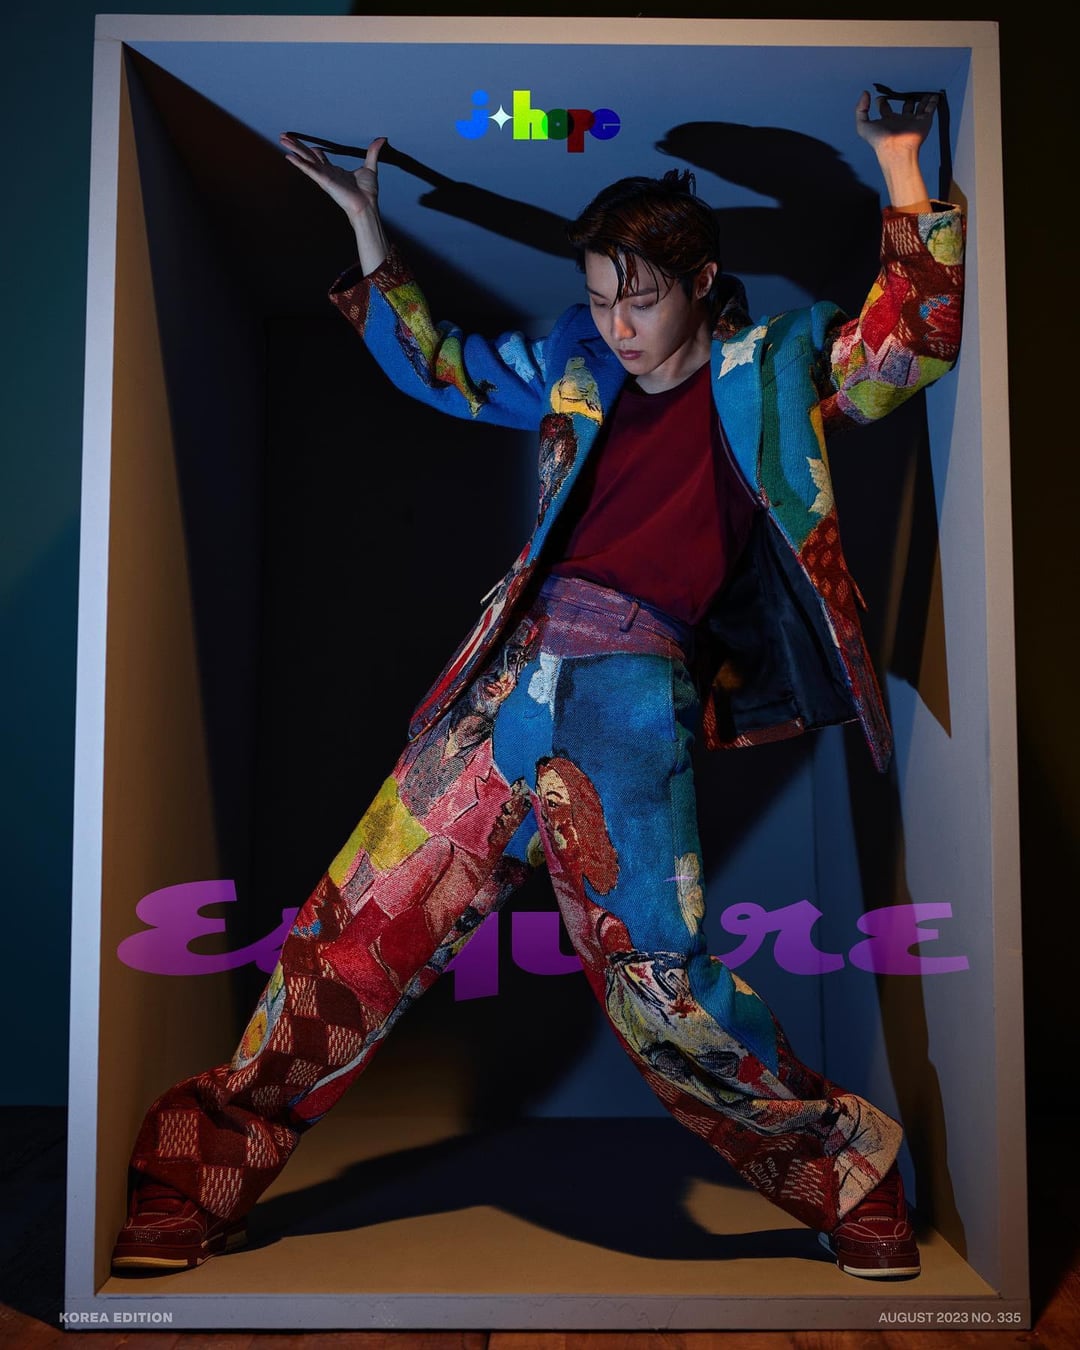 [Esquire Korea] j-hope for August 2023 issue covers - 110723